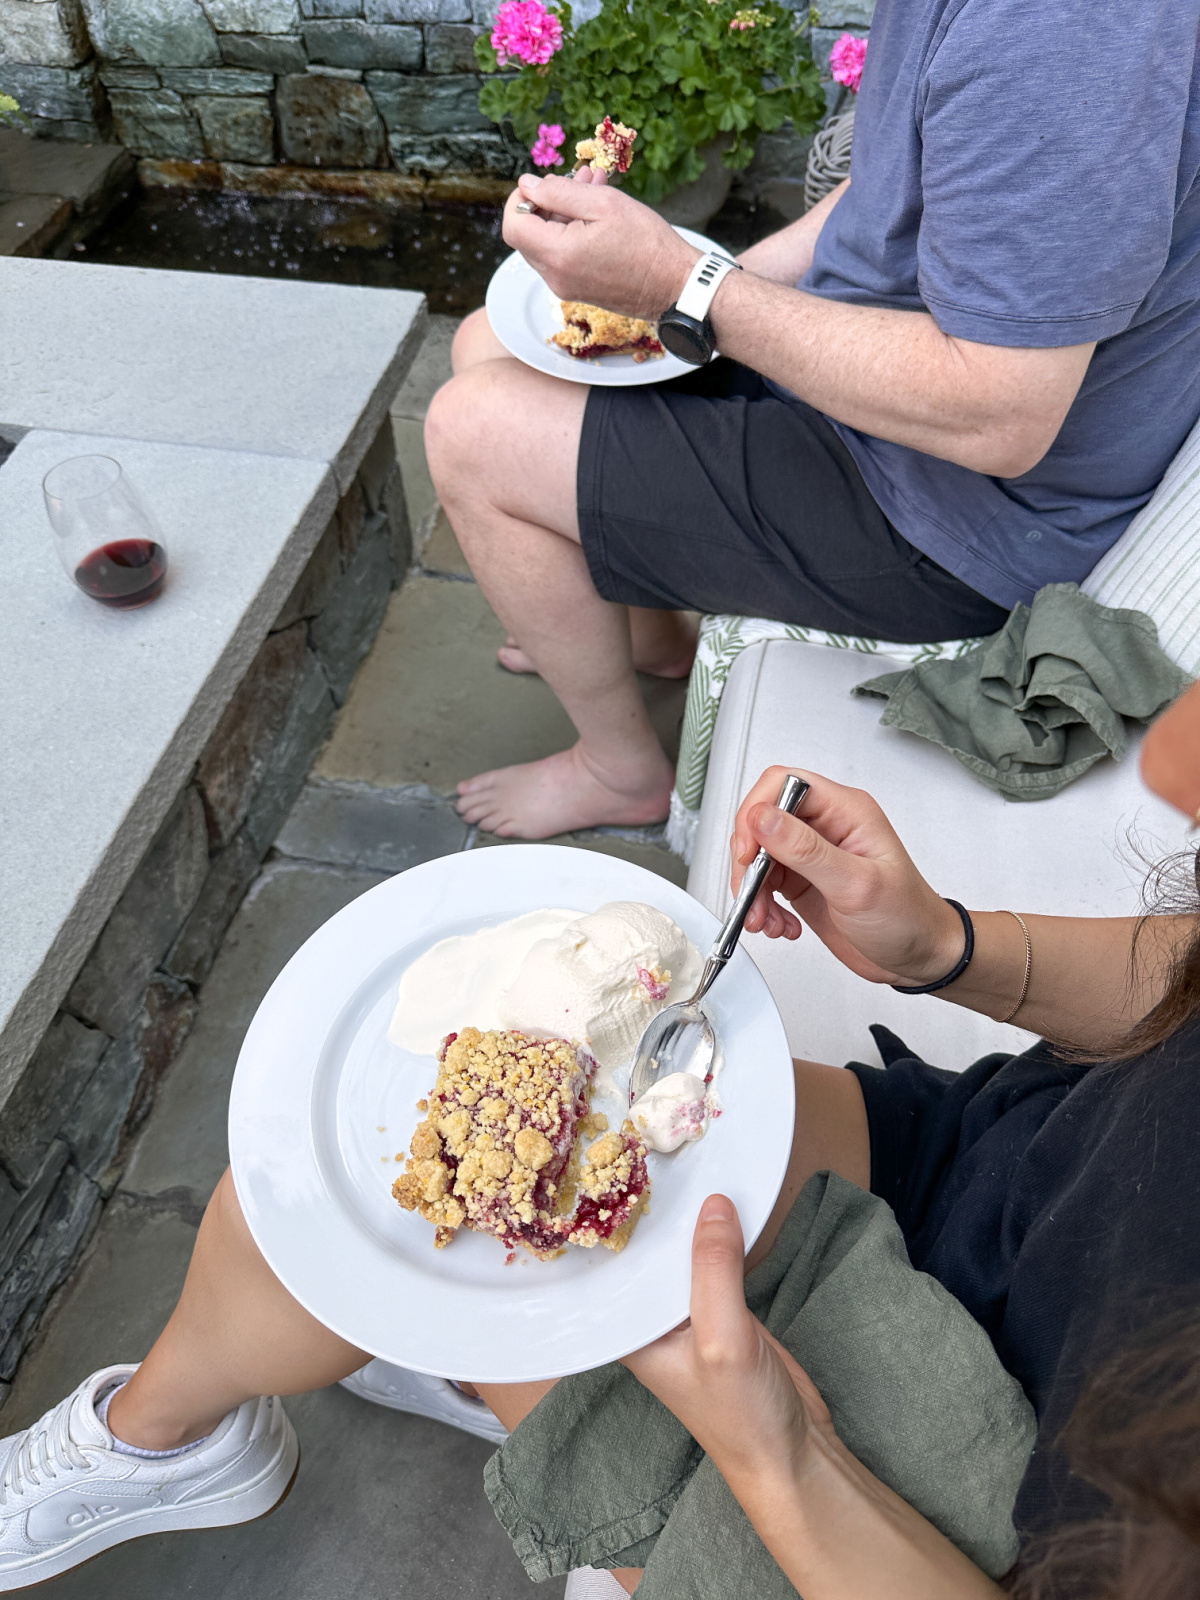 Overhead shot of man and woman sitting outside with dessert plates in their laps.